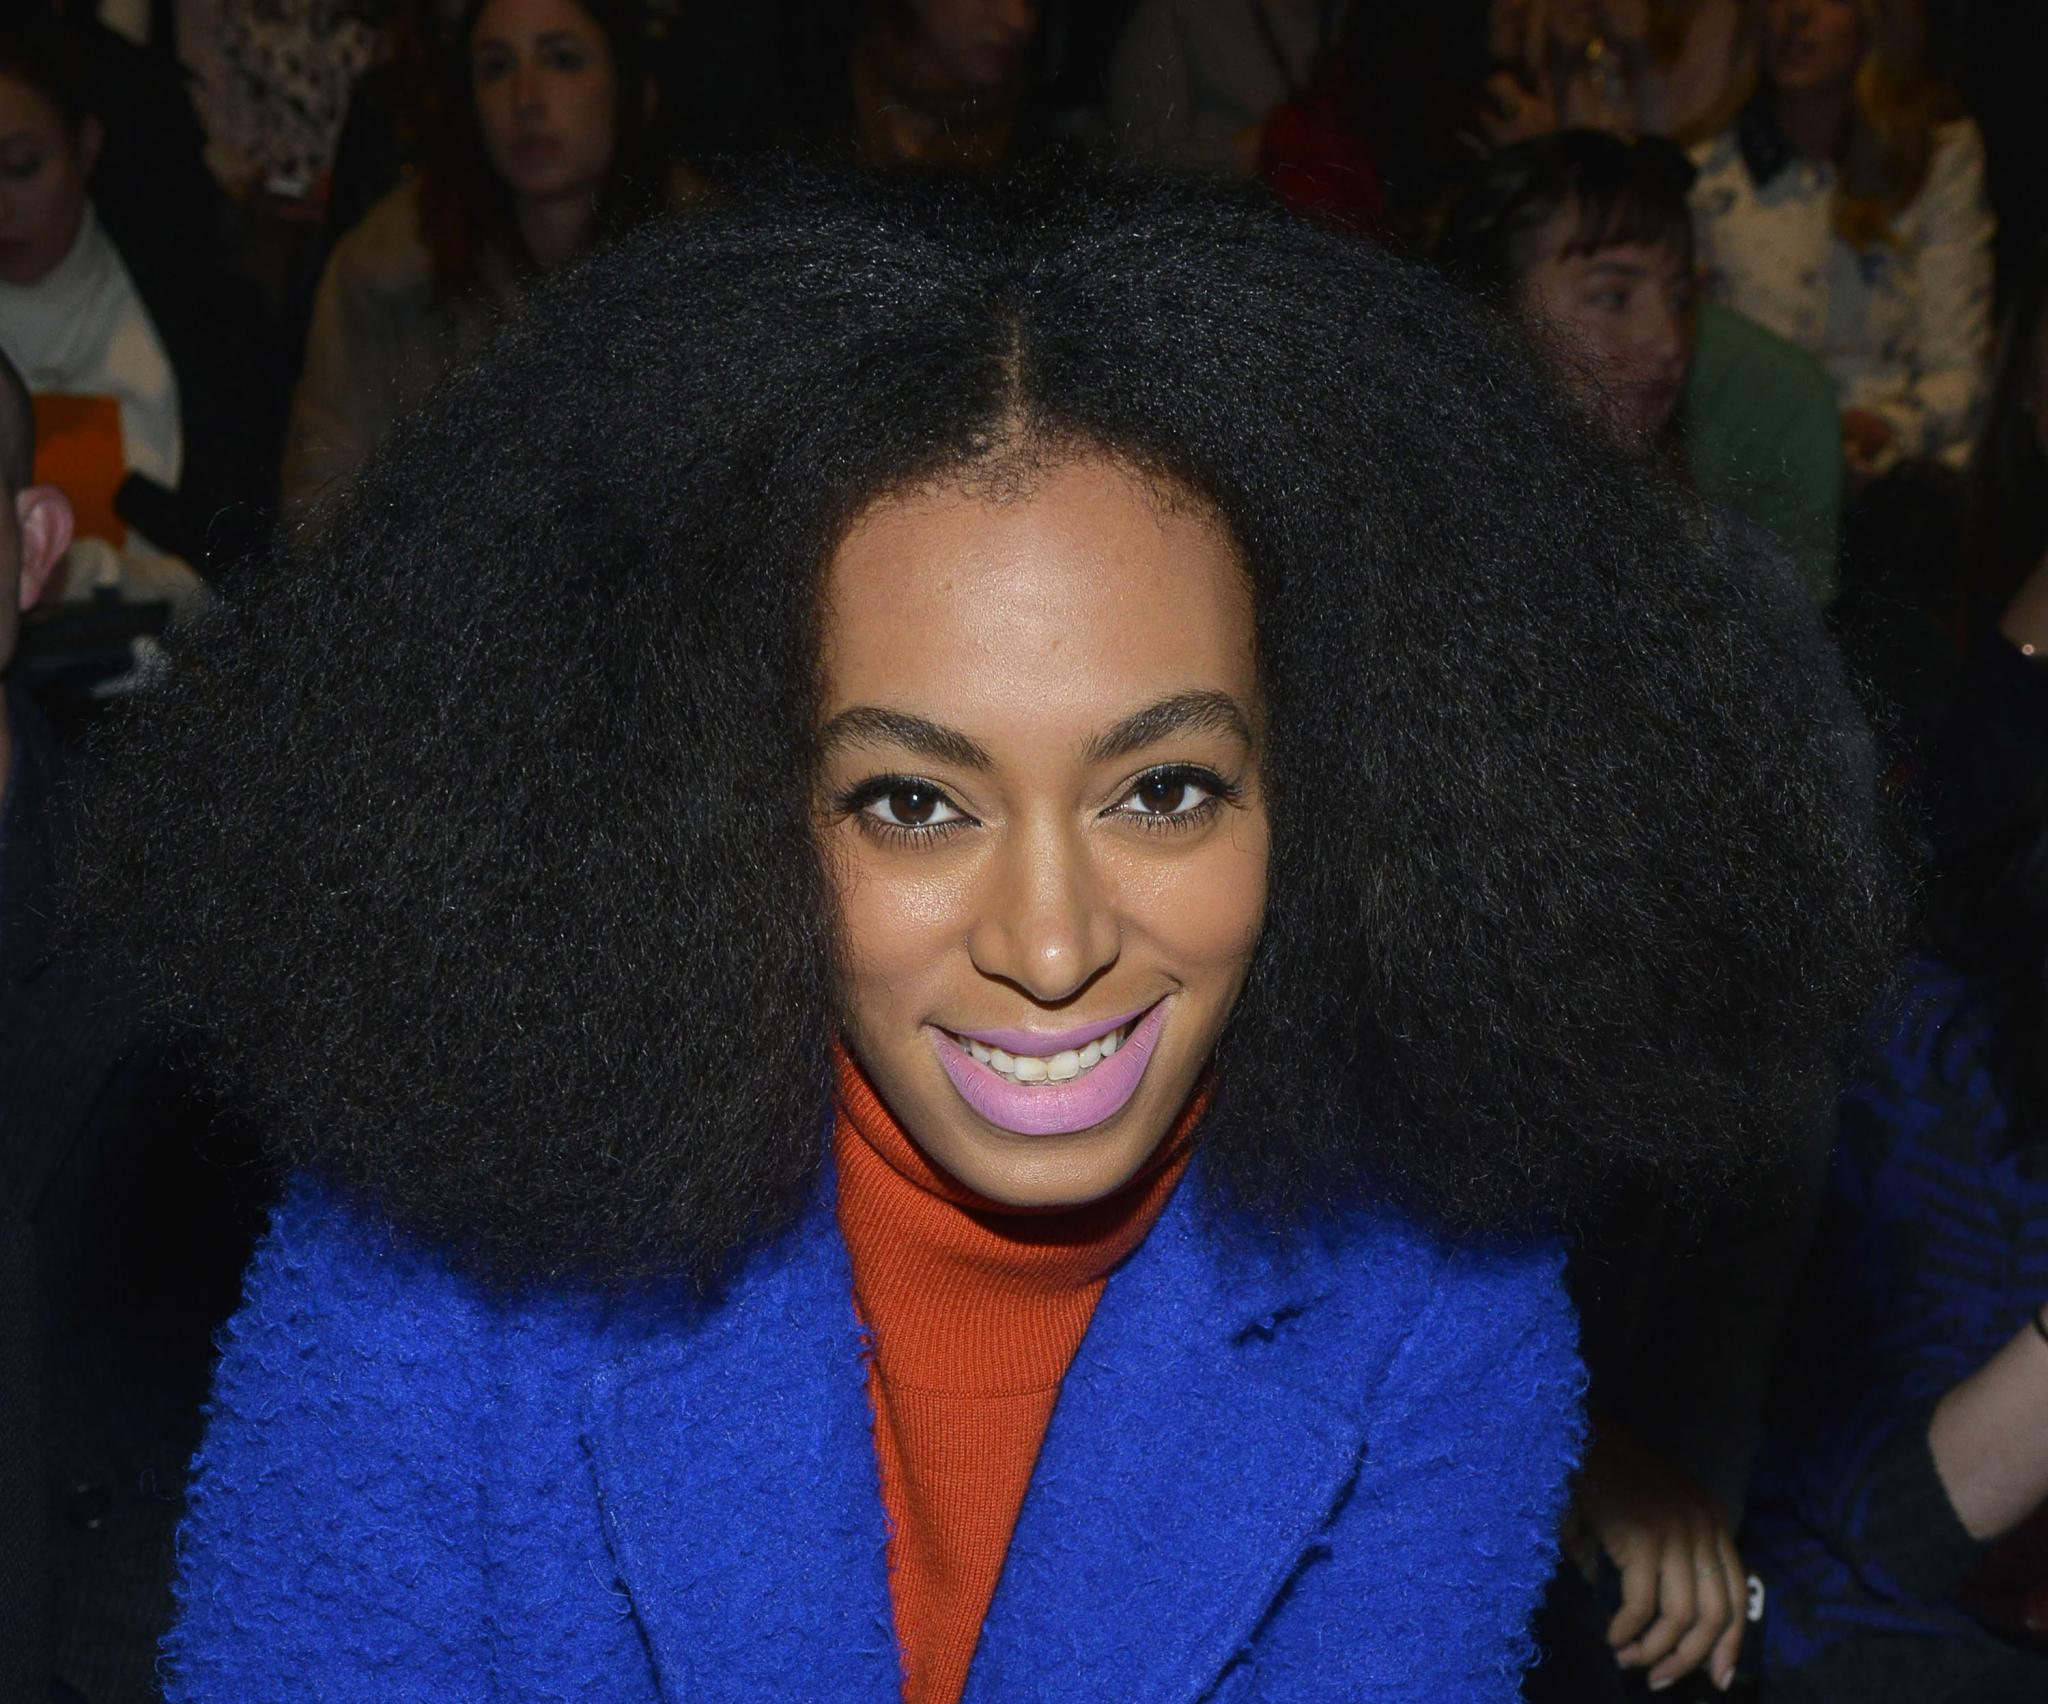 Solange Pairs Big Hair With Bold Lips
